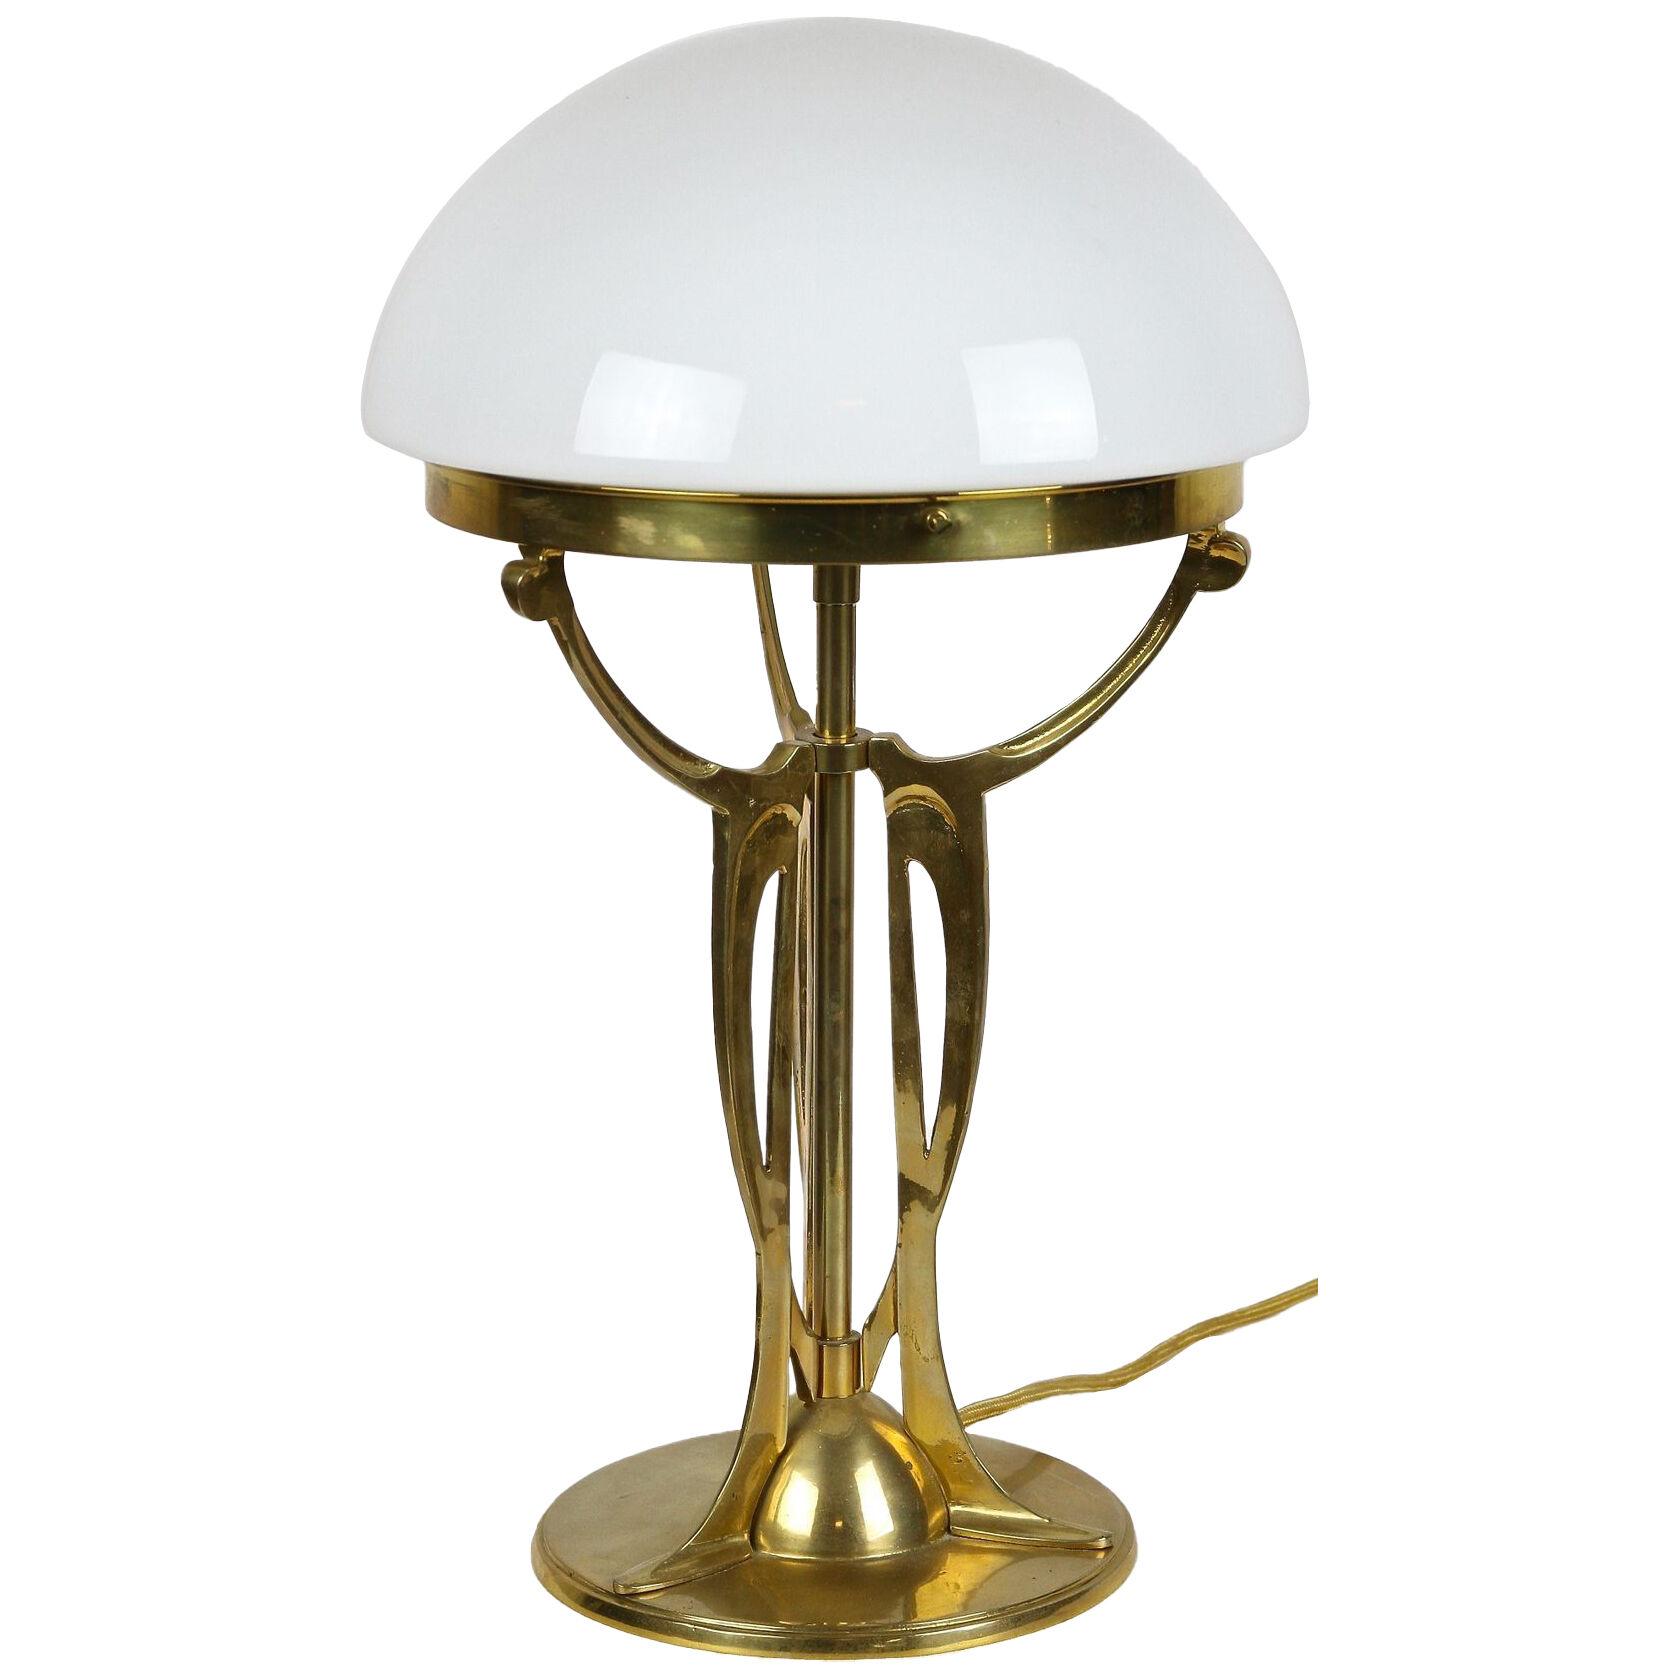 Art Nouveau Gilt Brass Table Lamp With White Glass Lampshade, Austria ca. 1910